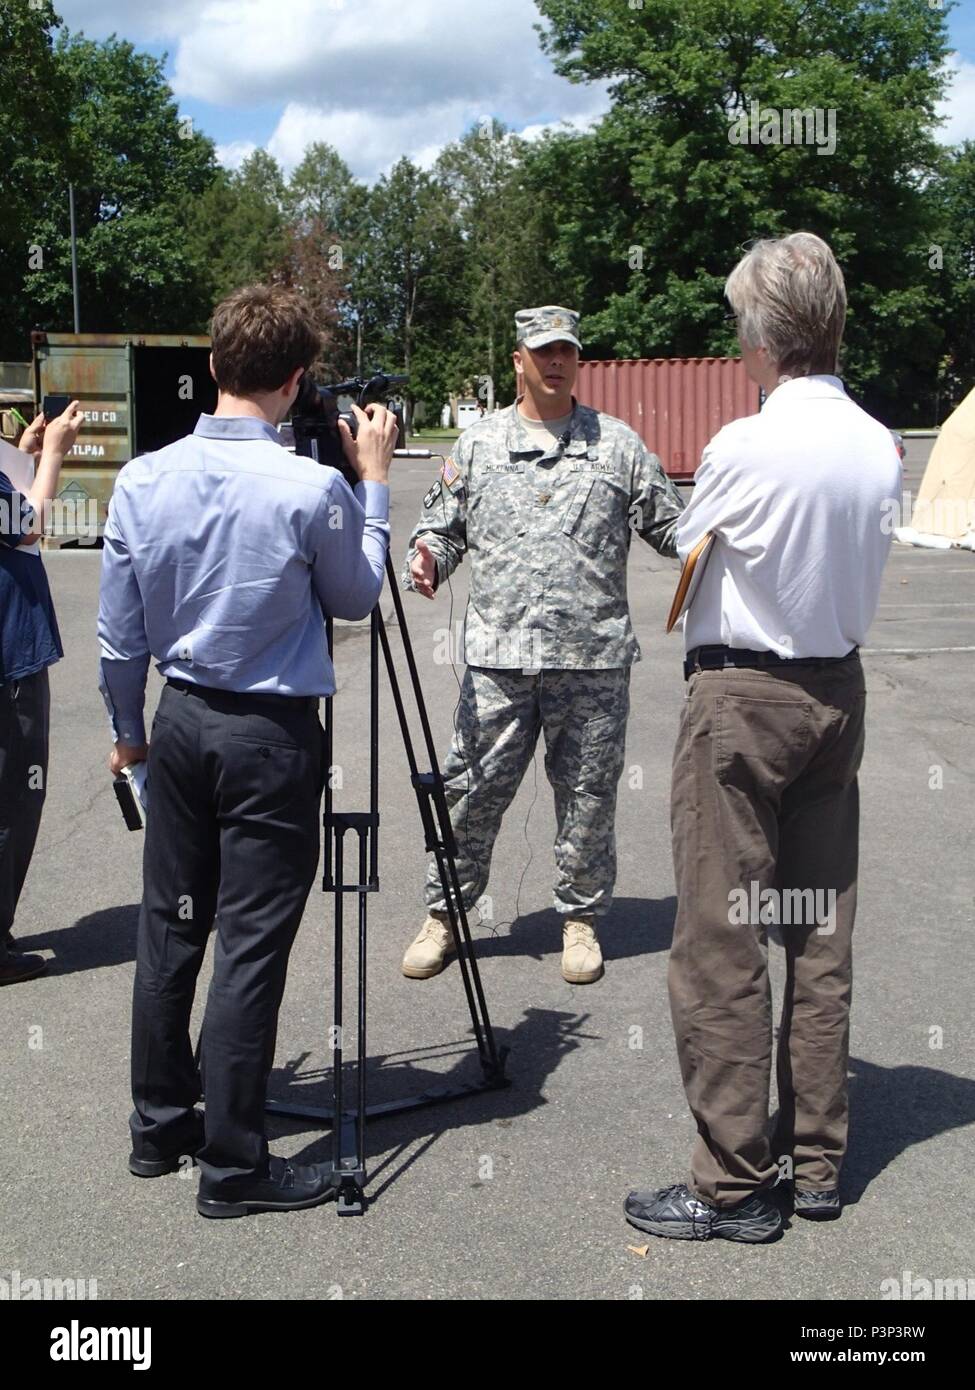 O Maj. Jeremy McKenna, mission commander from Company Alpha, 48th Combat Support Hospital out of Fort Story, Va., speaks to the media on the services provided at Greater Chenango Cares July 17, 2016. Greater Chenango Cares is one of the Innovative Readiness Training missions which provides real-world training in a joint civil-military environment while delivering world class medical care to the people of Chenango County, N.Y., from July 15-24. Stock Photo